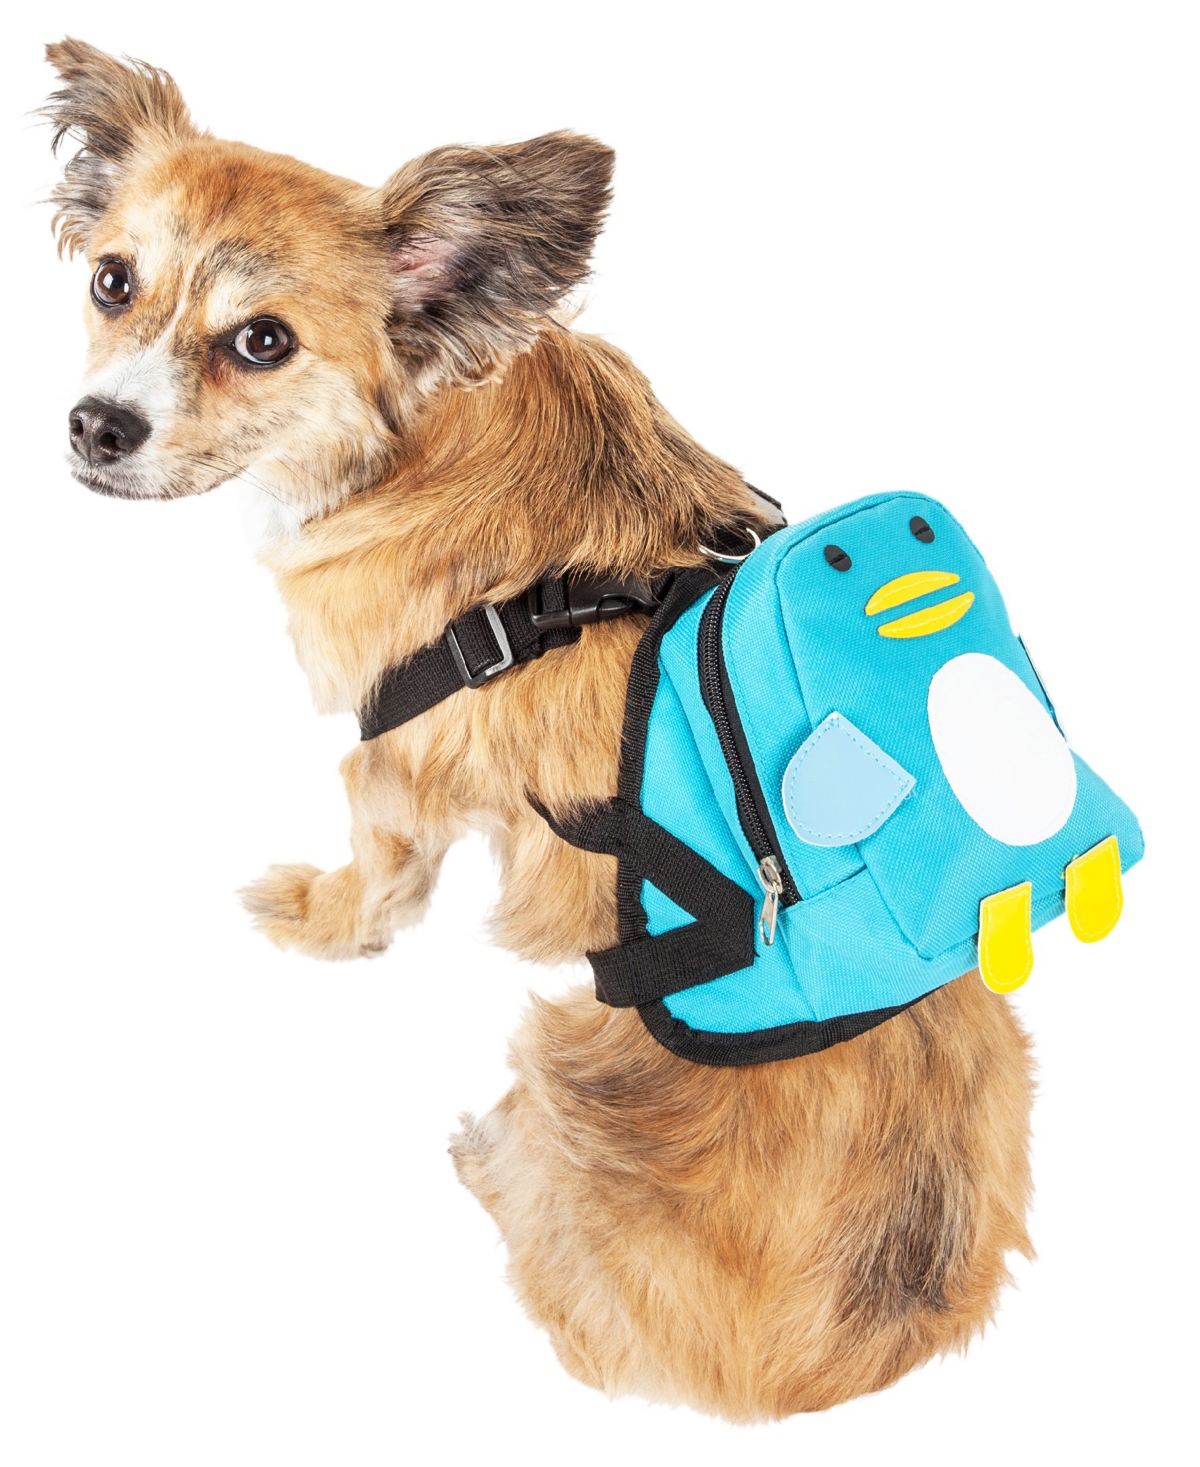 'Waggler Hobbler' Compartmental Animated Dog Harness Backpack - Blue